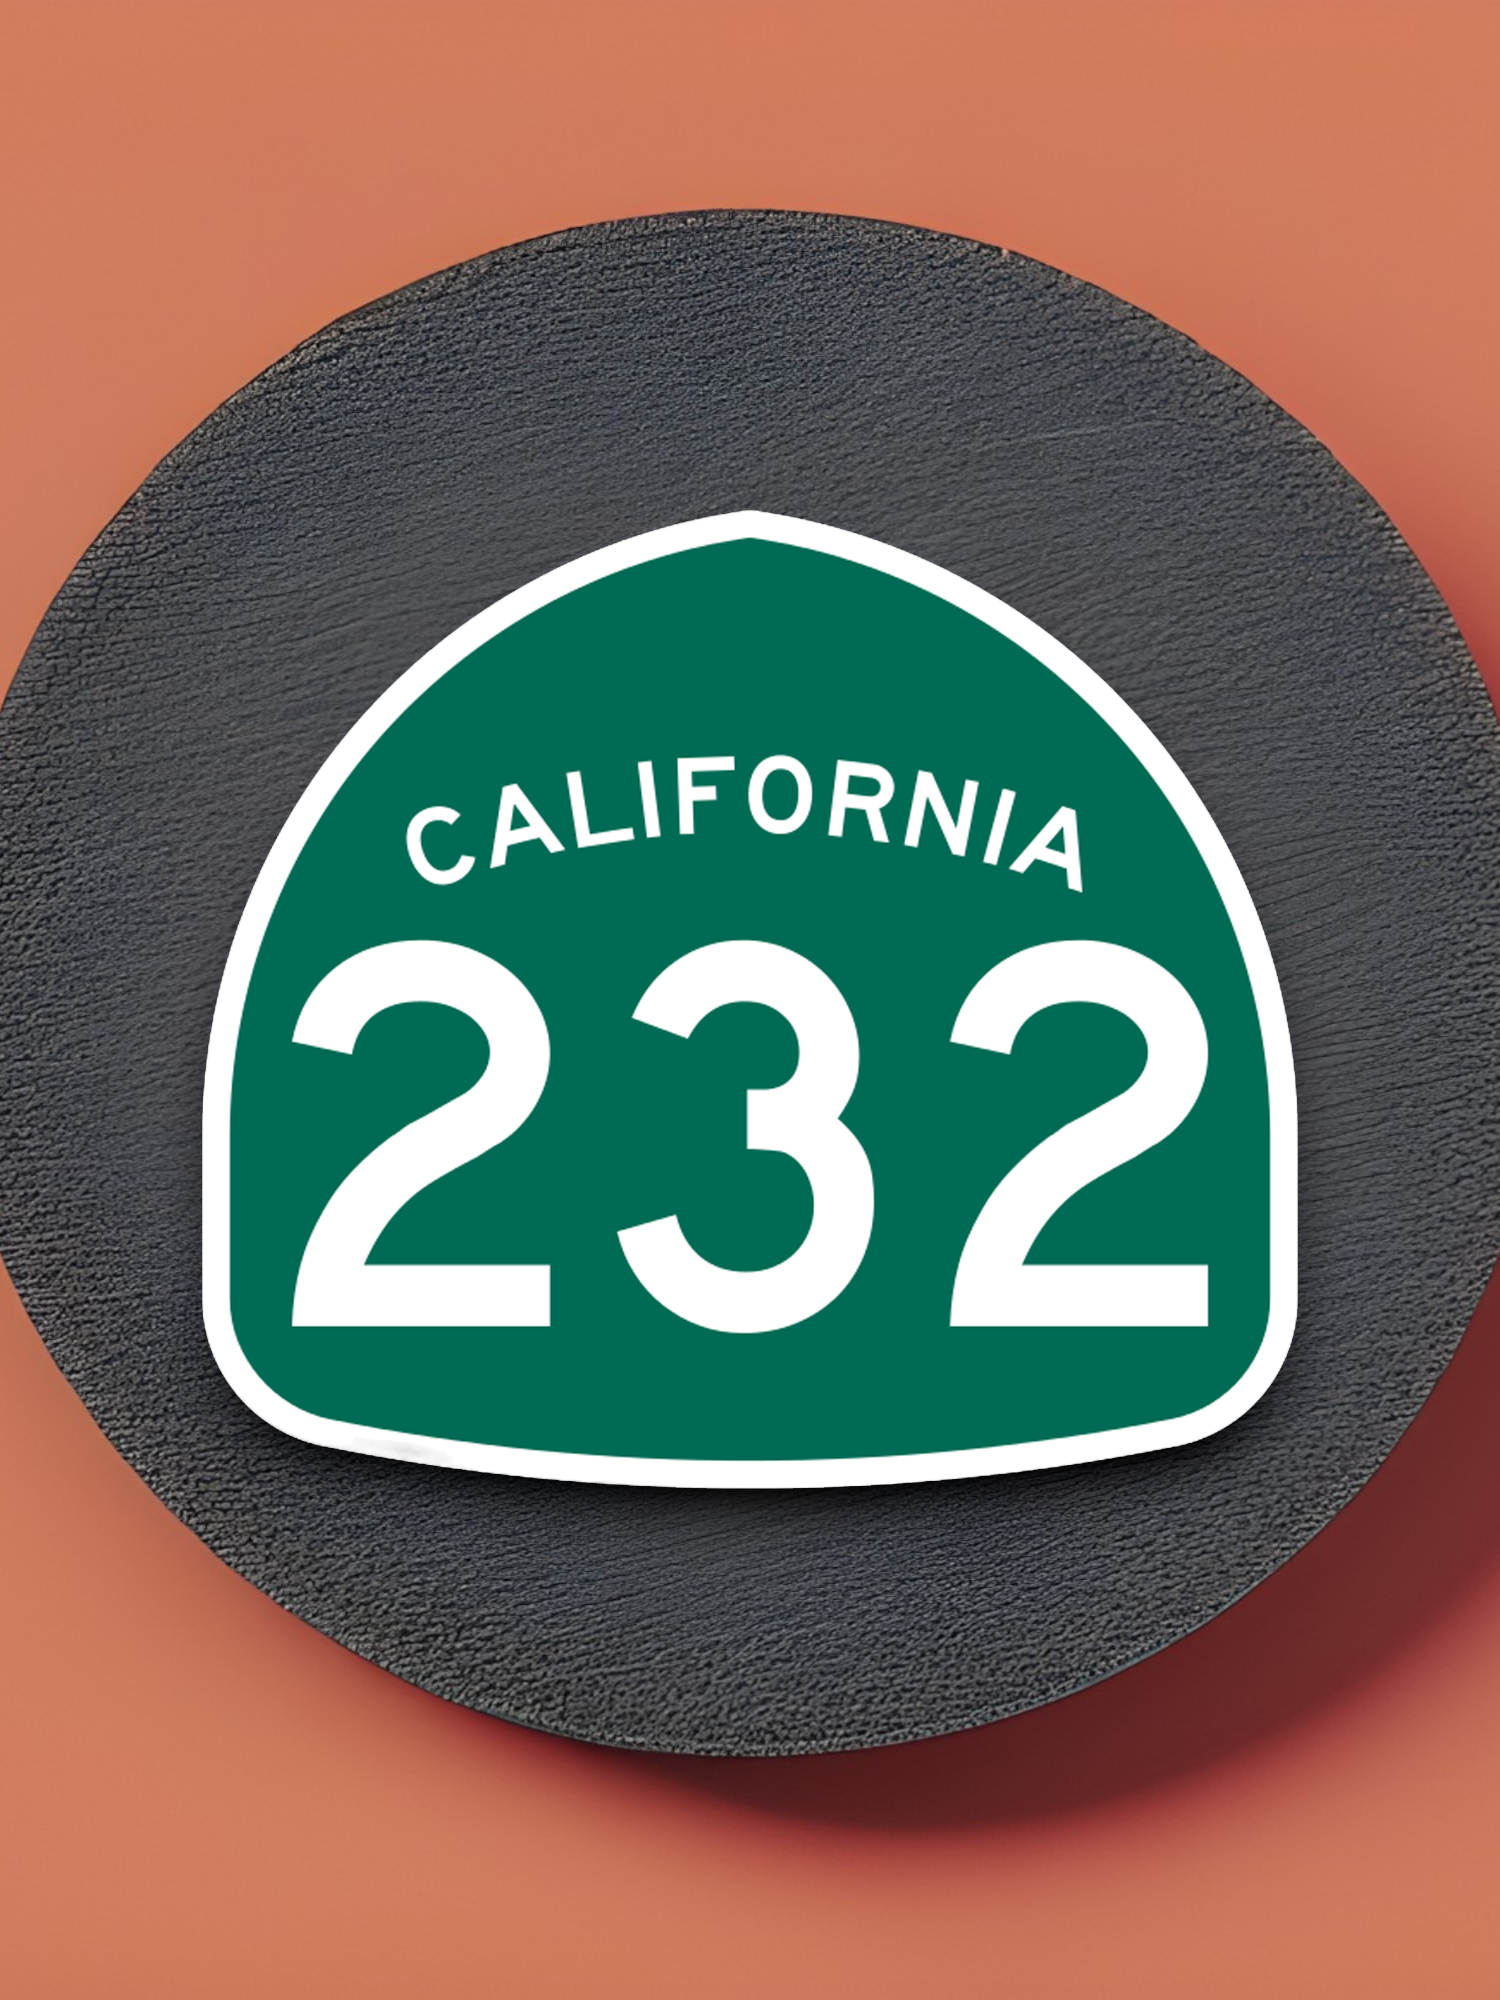 California State Route 232 Road Sign Sticker